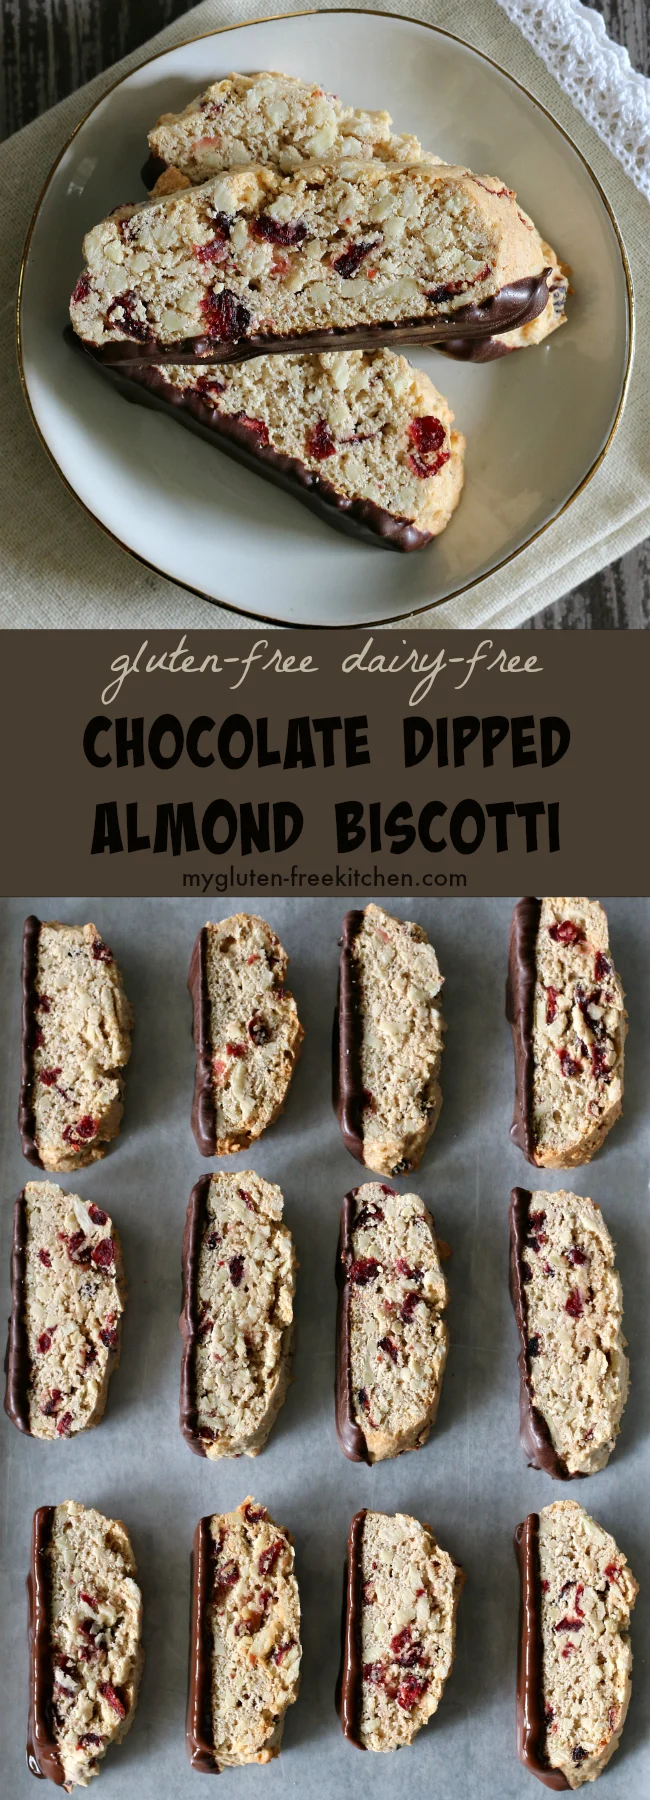 gluten-free Chocolate Dipped Almond Biscotti dairy-free recipe. Crunchy, flavorful cookie that's perfect with tea or coffee.